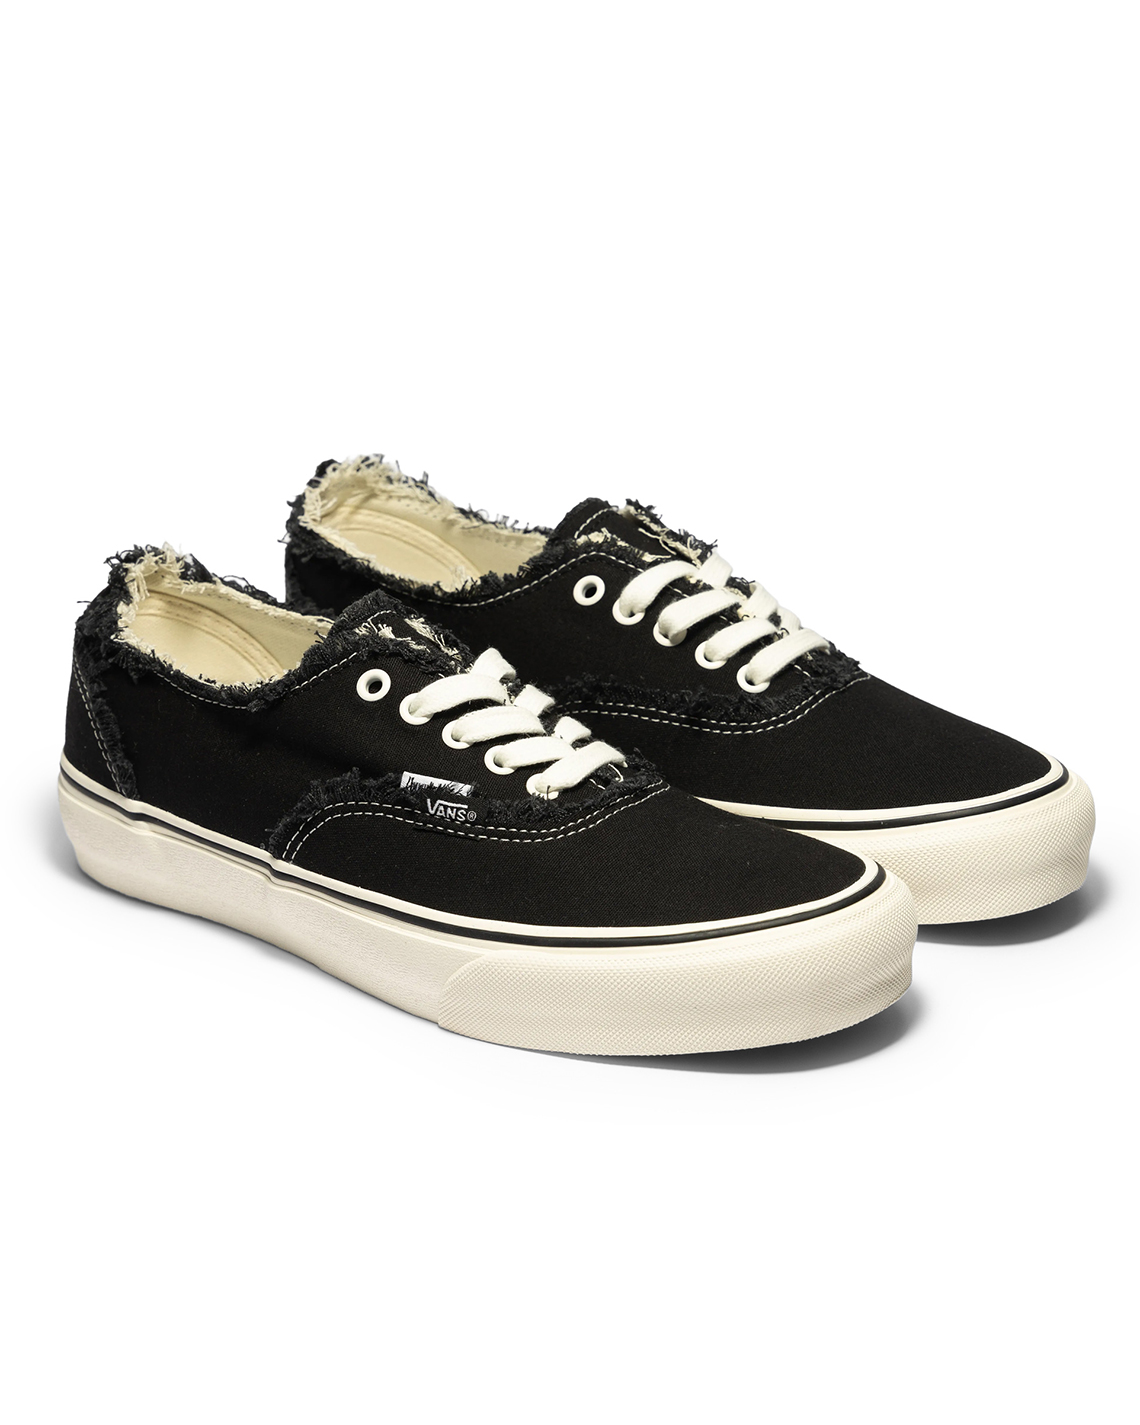 Invincible Vans Gnarly Pack Authentic 4